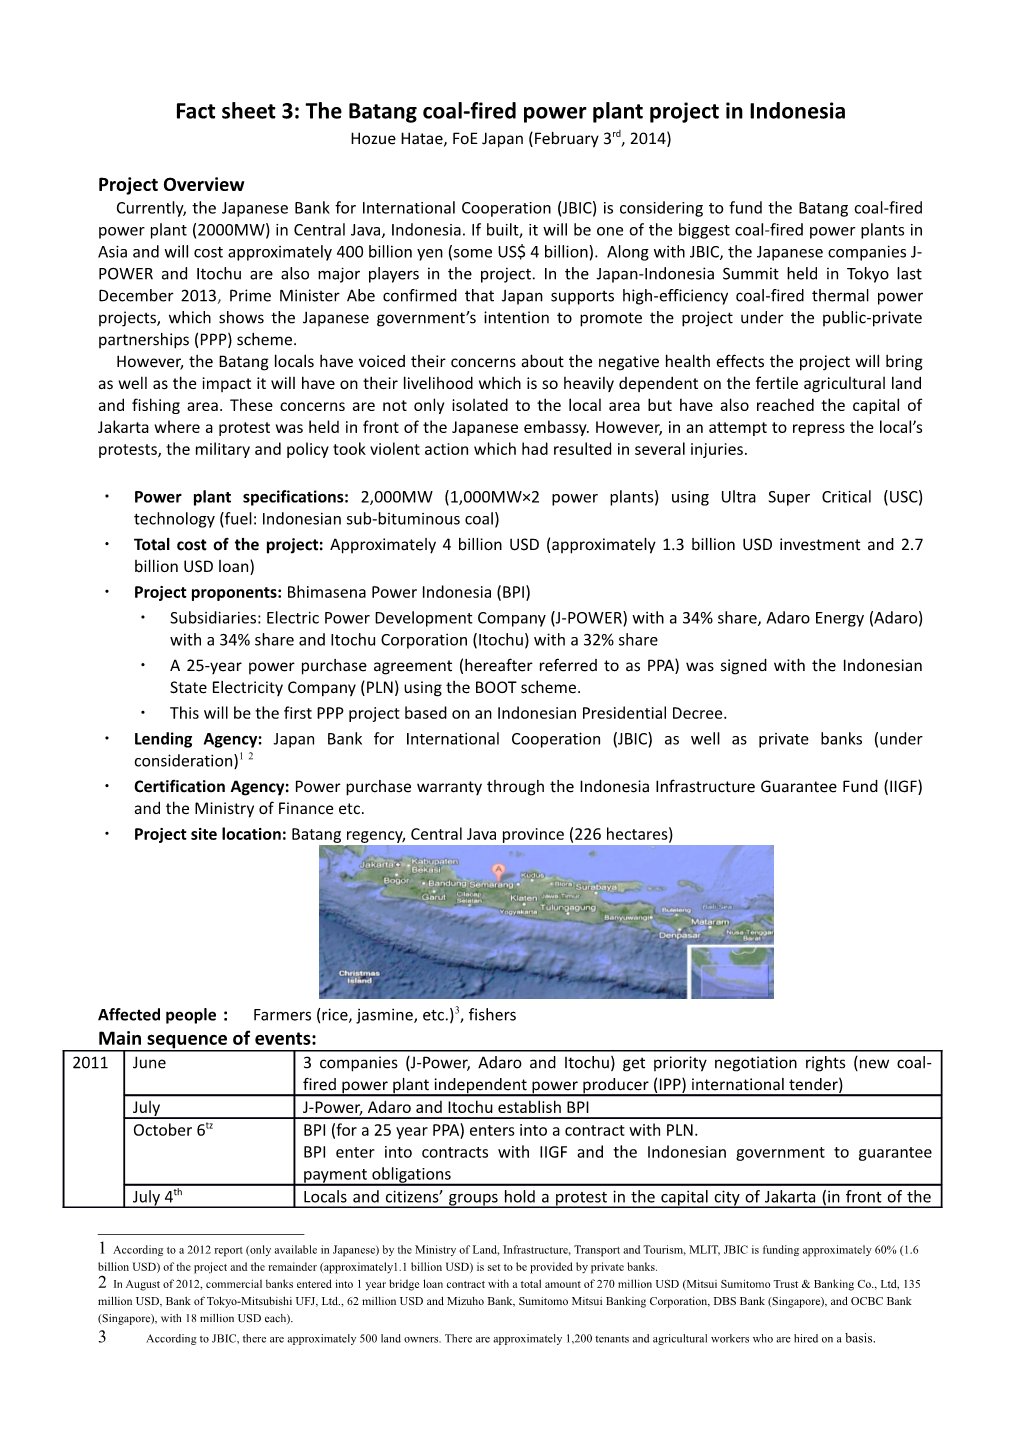 Fact Sheet 3: the Batang Coal-Fired Power Plant Project in Indonesia